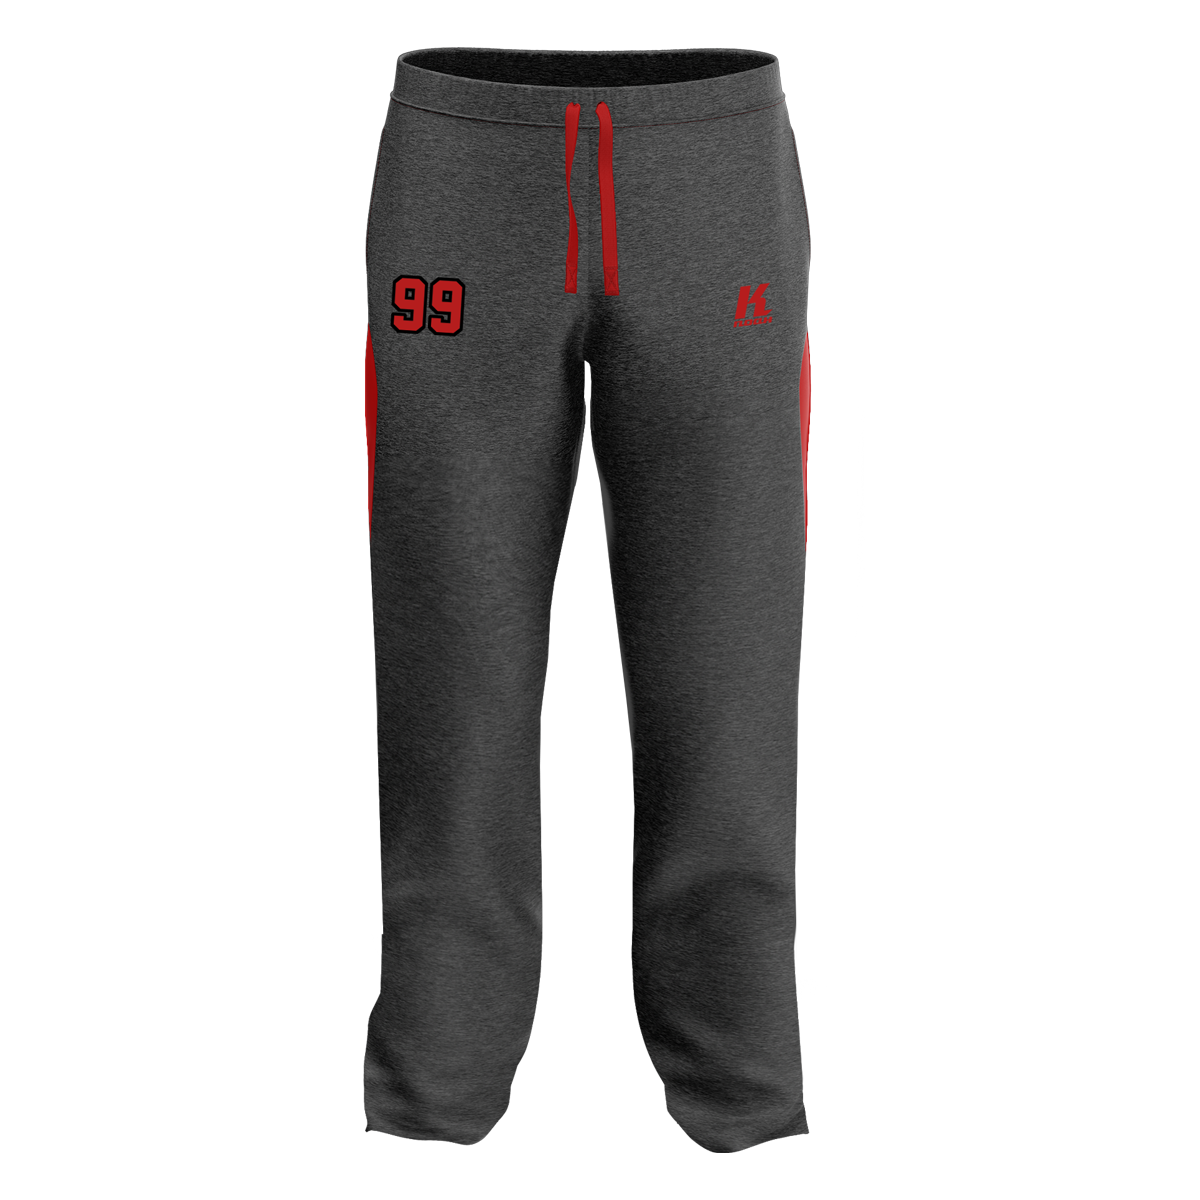 Warriors Signature Series Sweat Pant with Playernumber/Initials